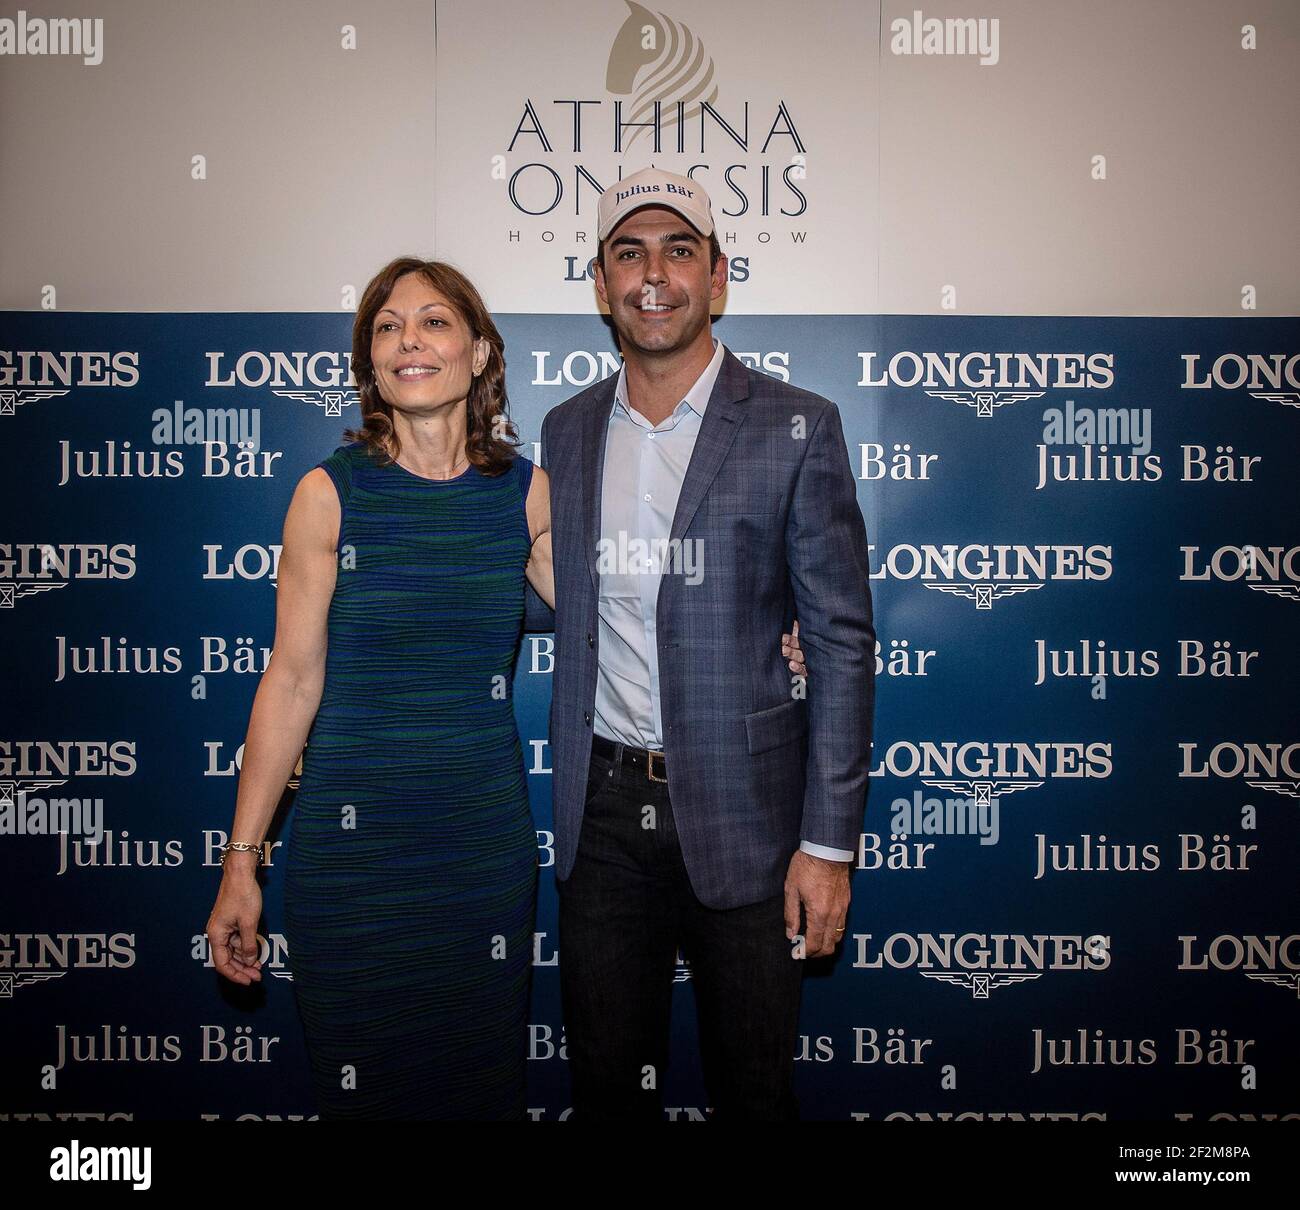 Mrs SQUECCO (JULIUS BEAR BANK), ALVARO DE MIRANDA (Rider), during the Press conference at the Bristol hotel in Paris, France, on May 21, 2014 for the Longines Athina Onassis Horse Show in June 5th-7th in Pampelonne beach, Saint Tropez, France - Photo Christophe Bricot / DPPI Stock Photo